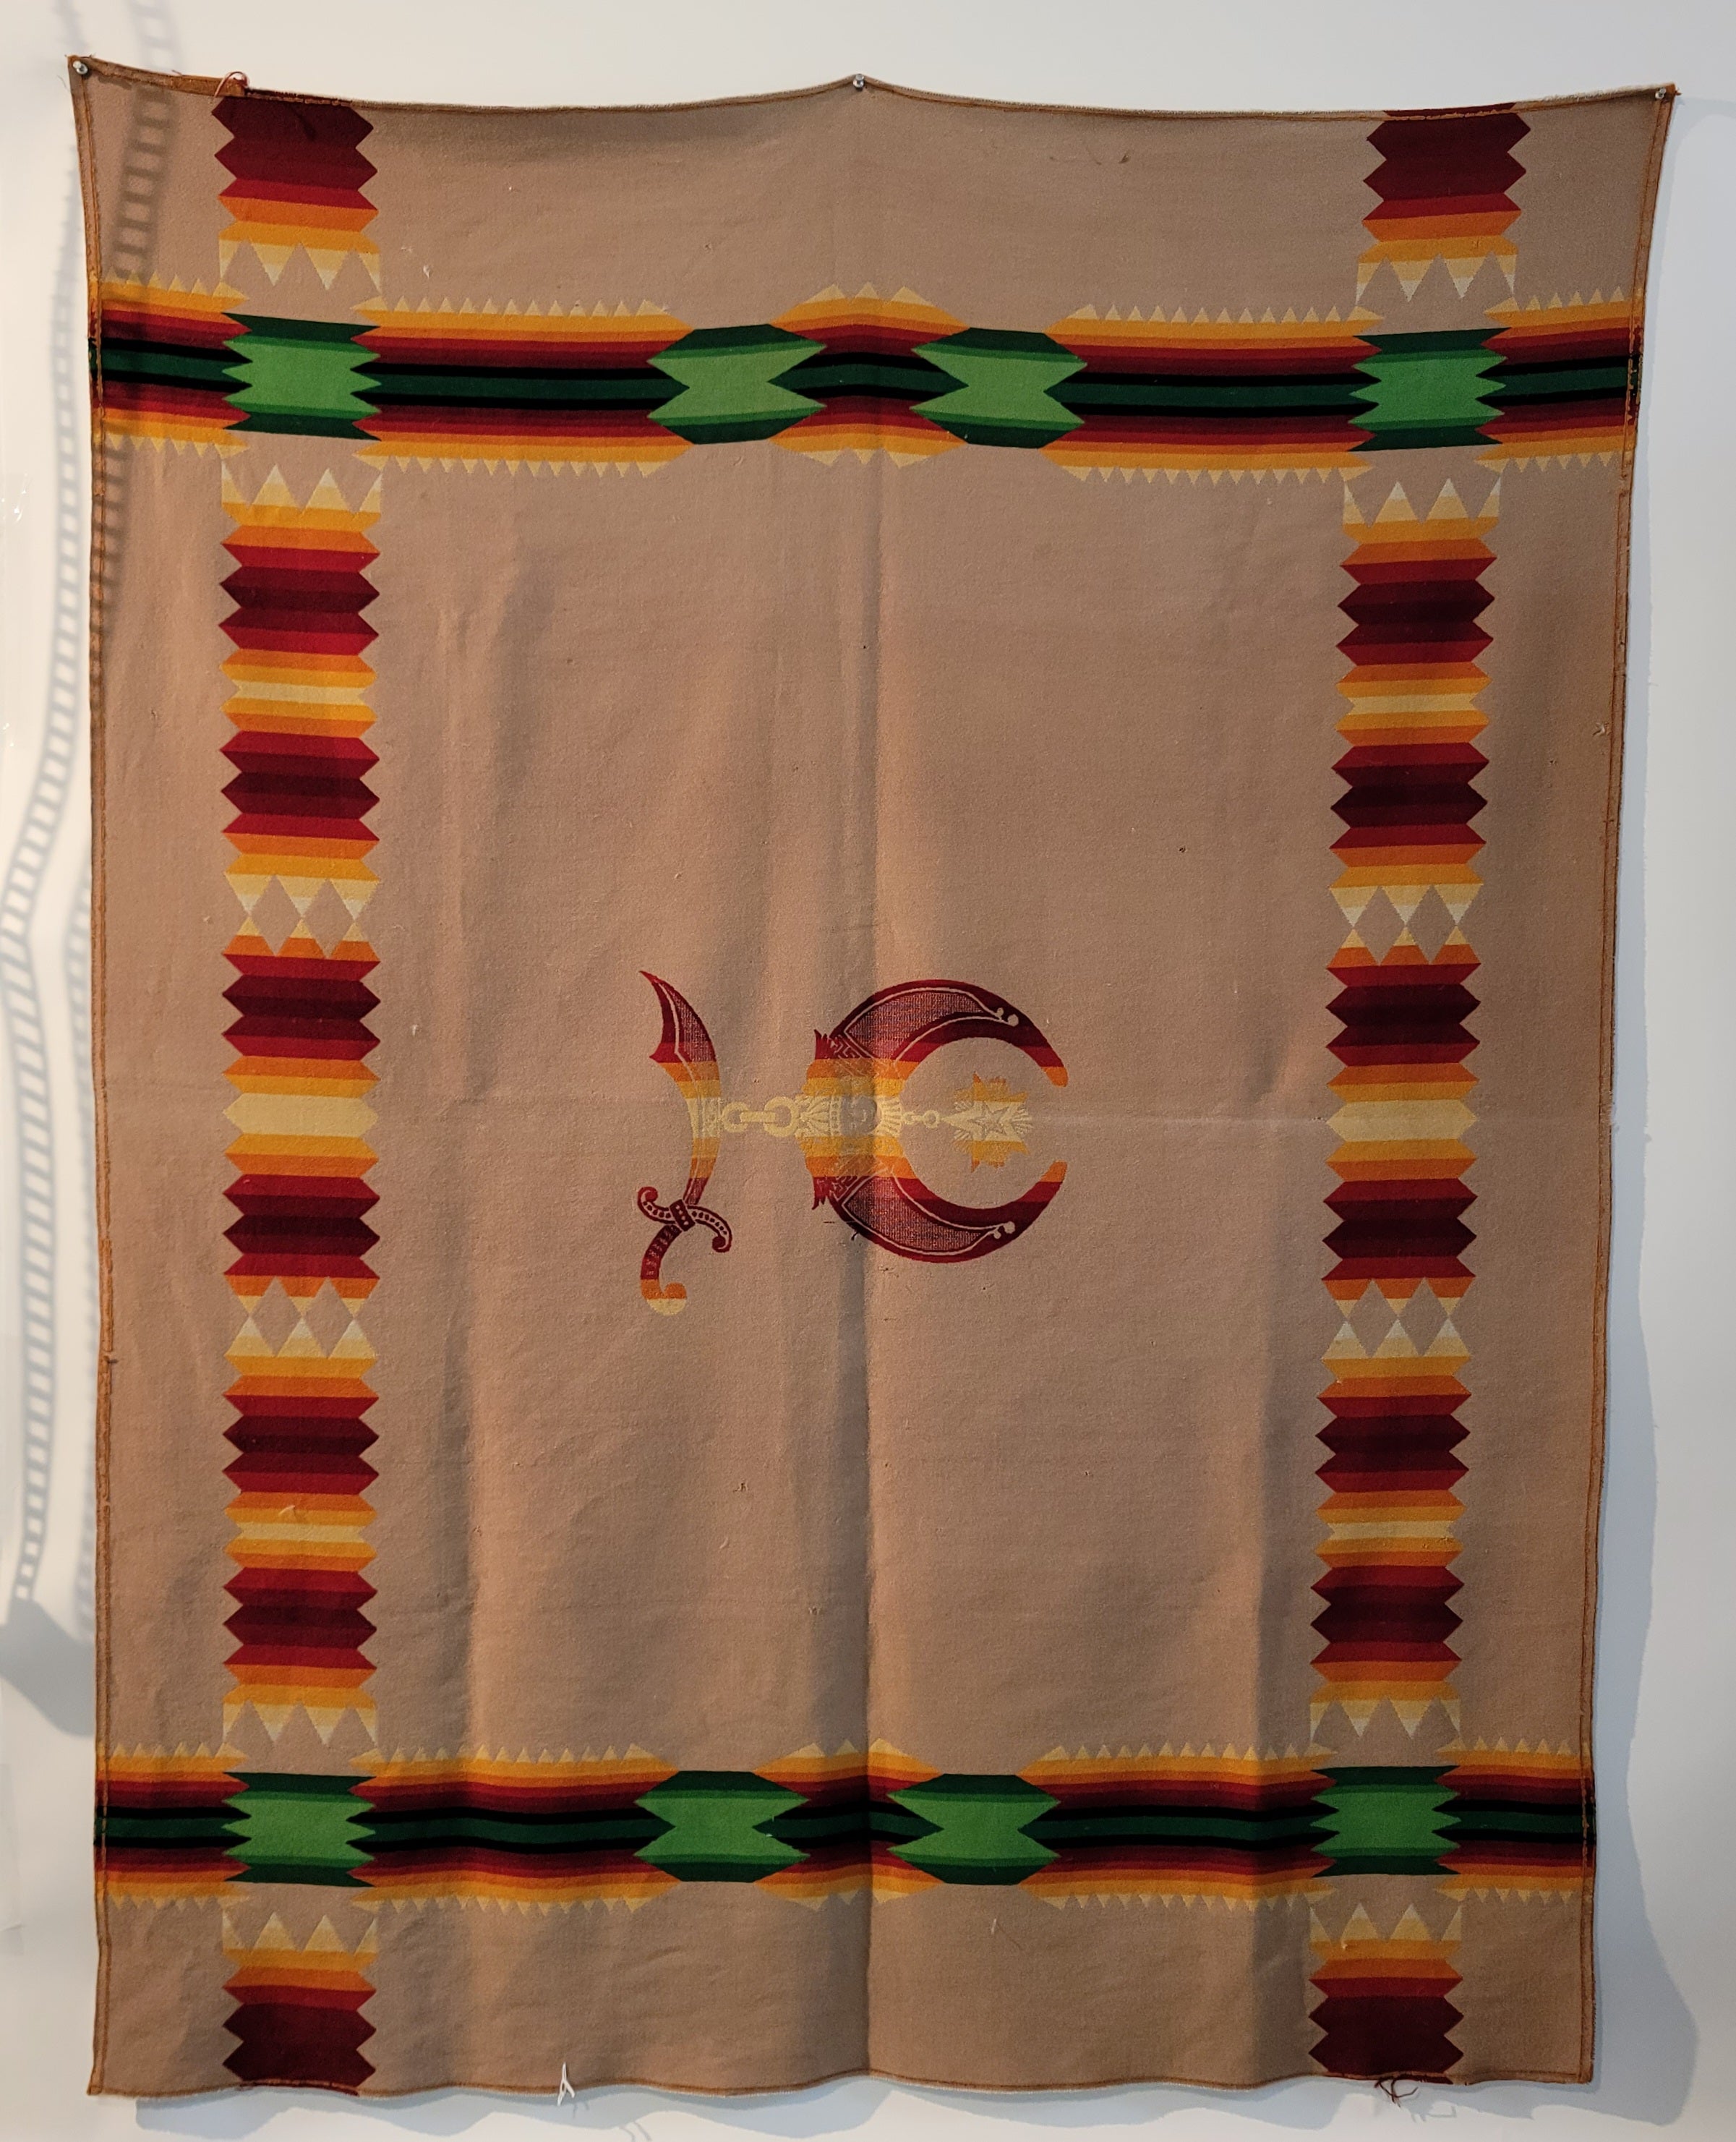 Pendleton Indian Design camp blanket with a masonic symbol in the center of the blanket.